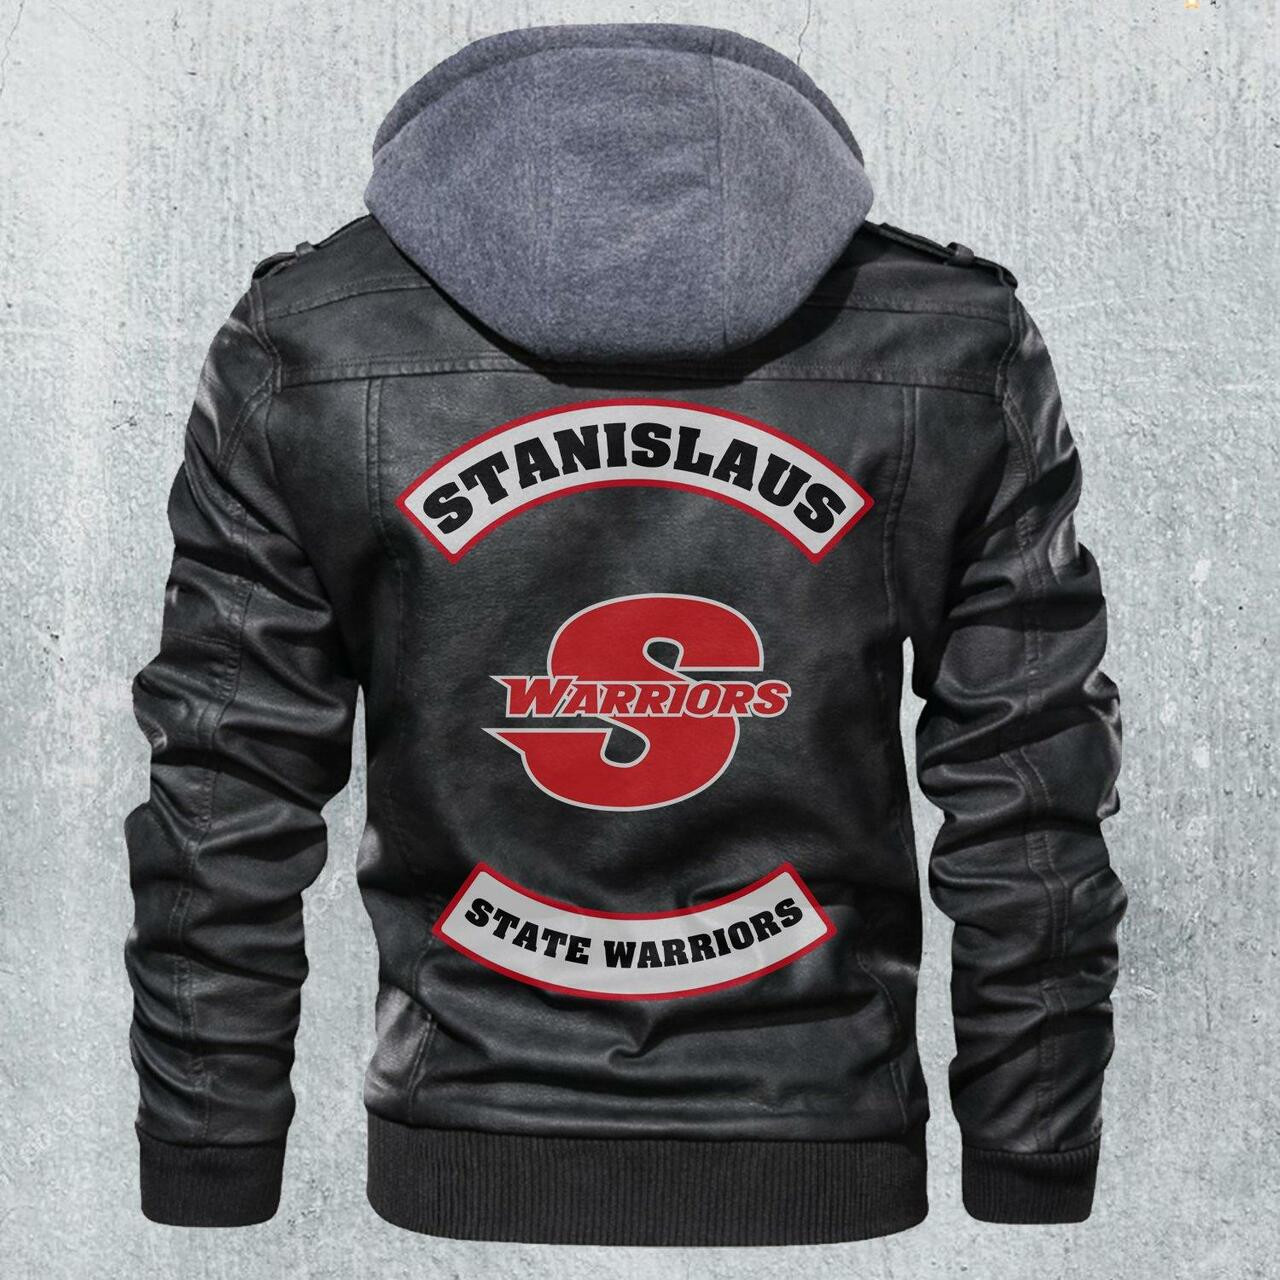 Our store has all of the latest leather jacket 20